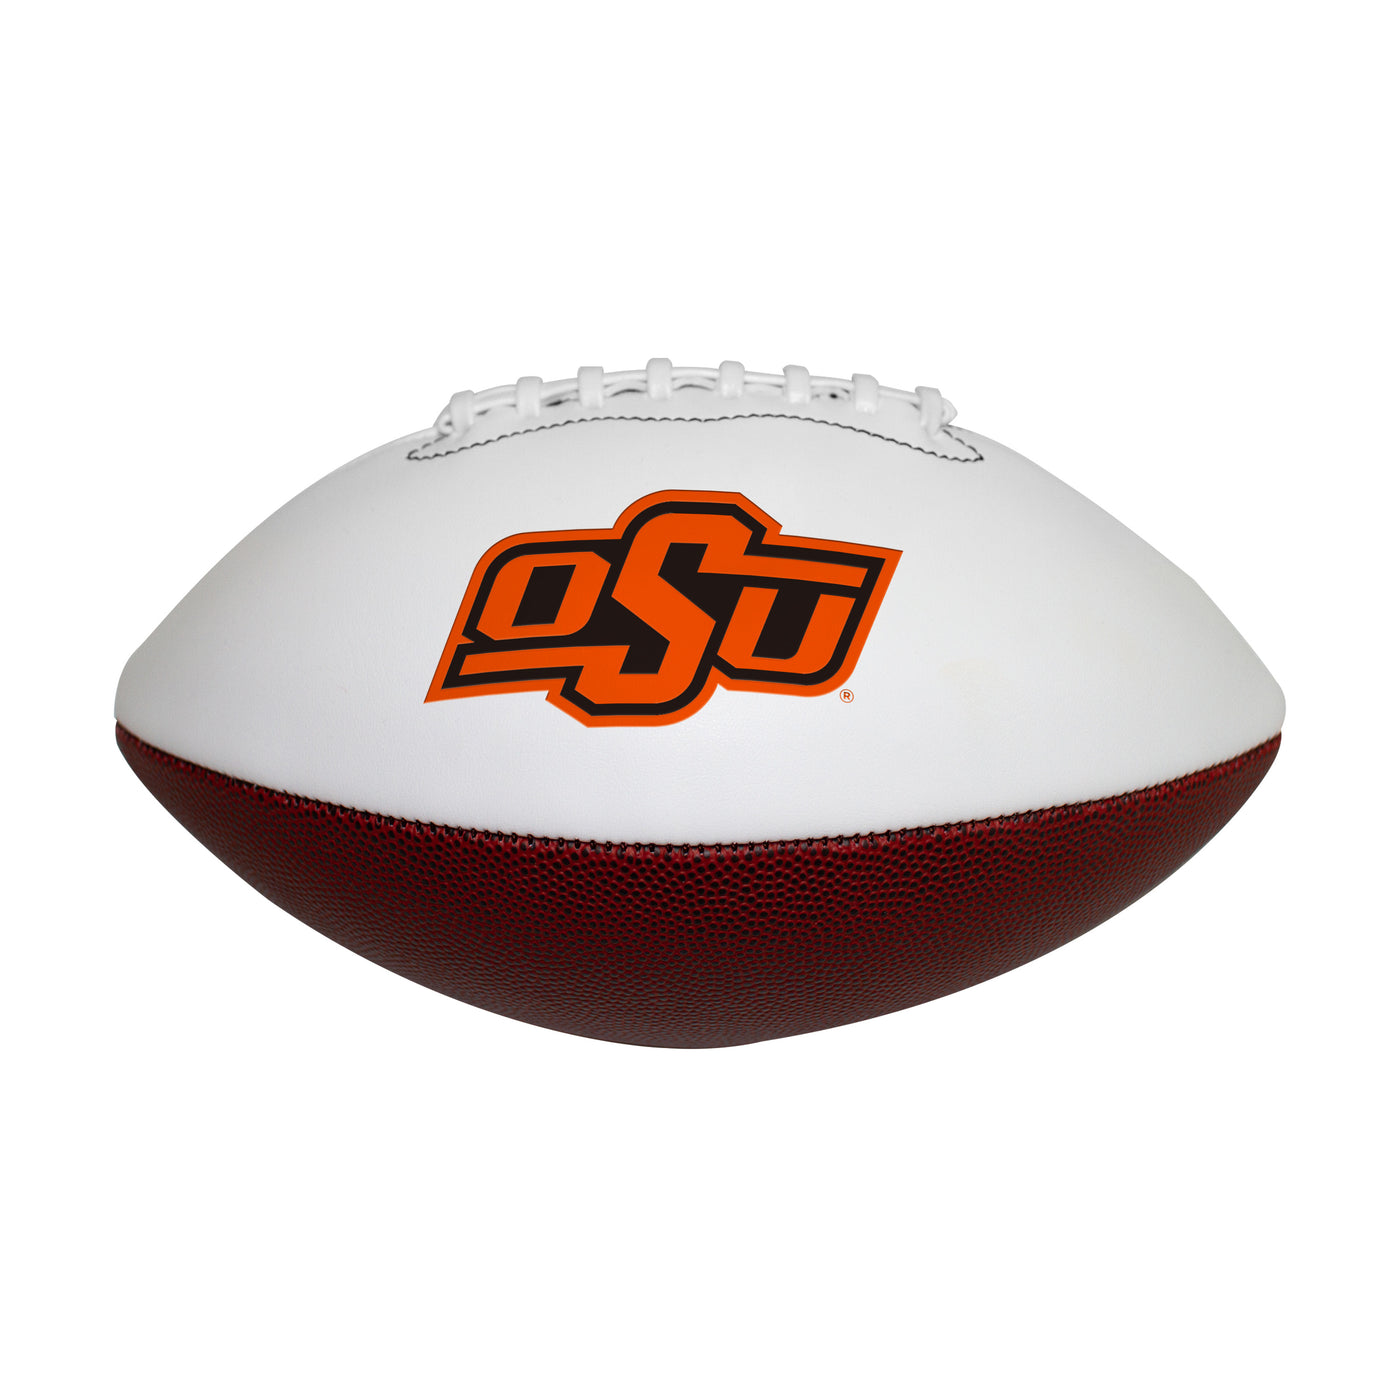 OK State Official-Size Autograph Football